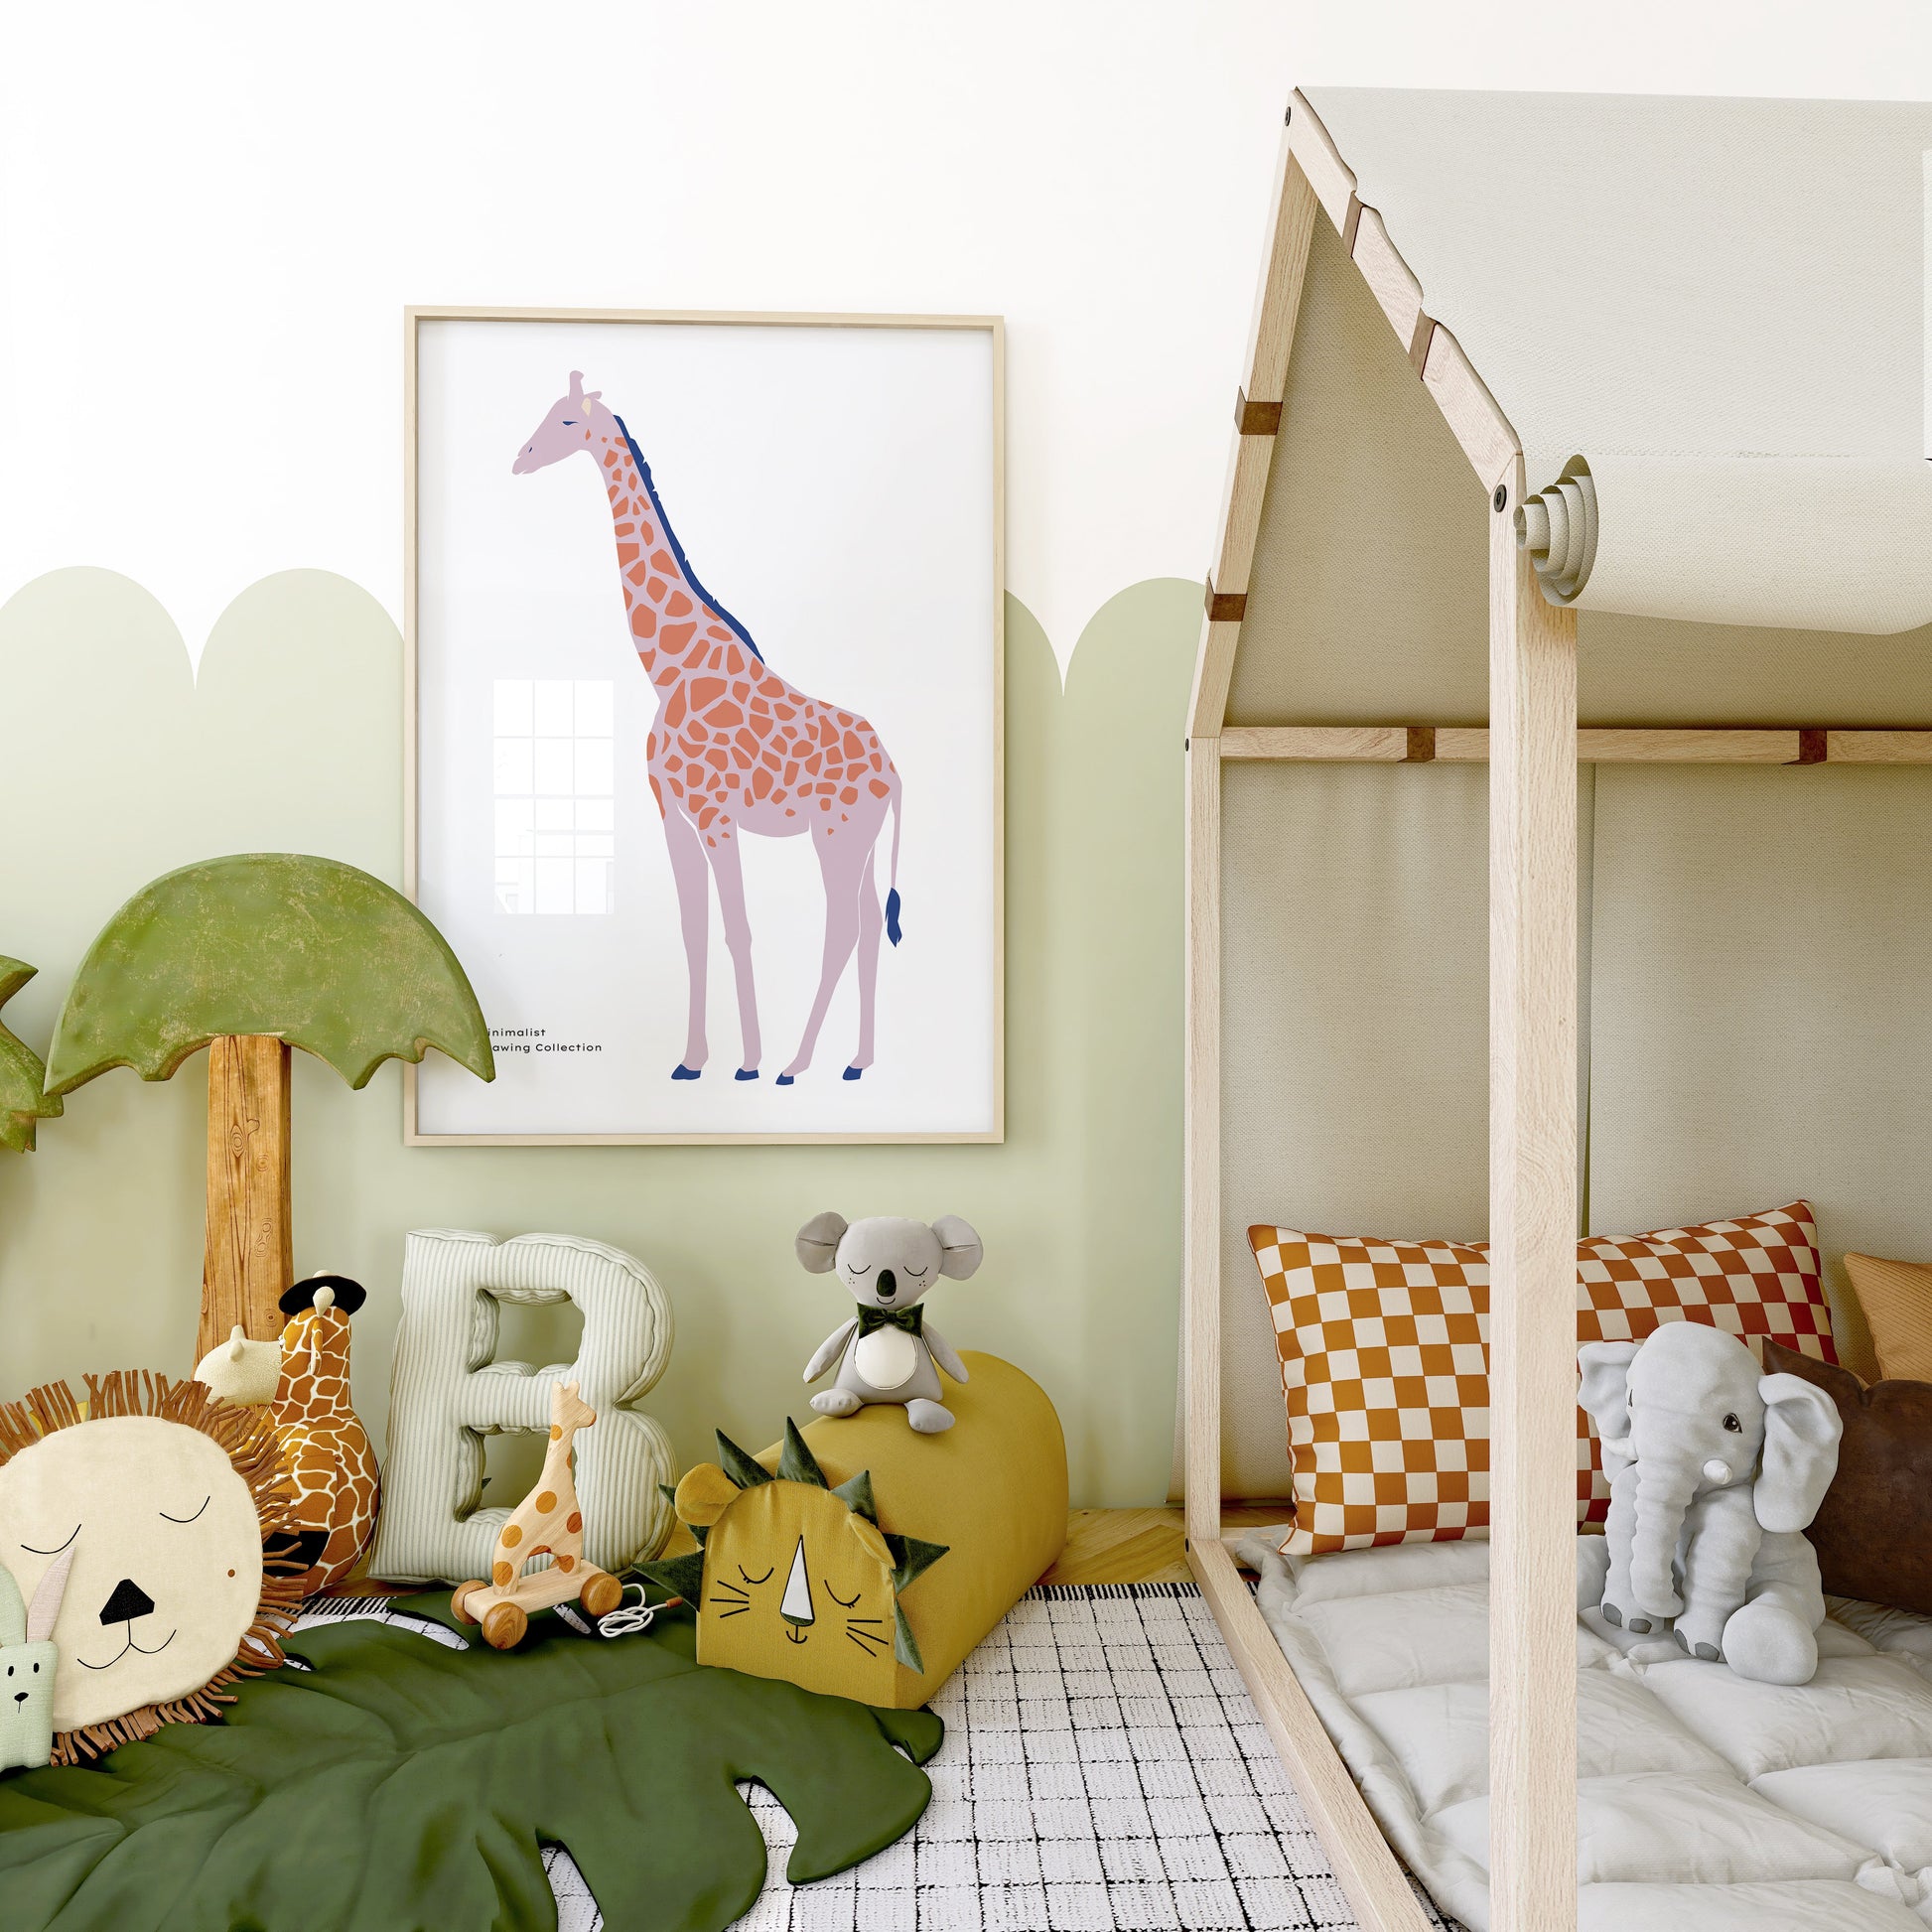 a child's bedroom with a giraffe print on the wall